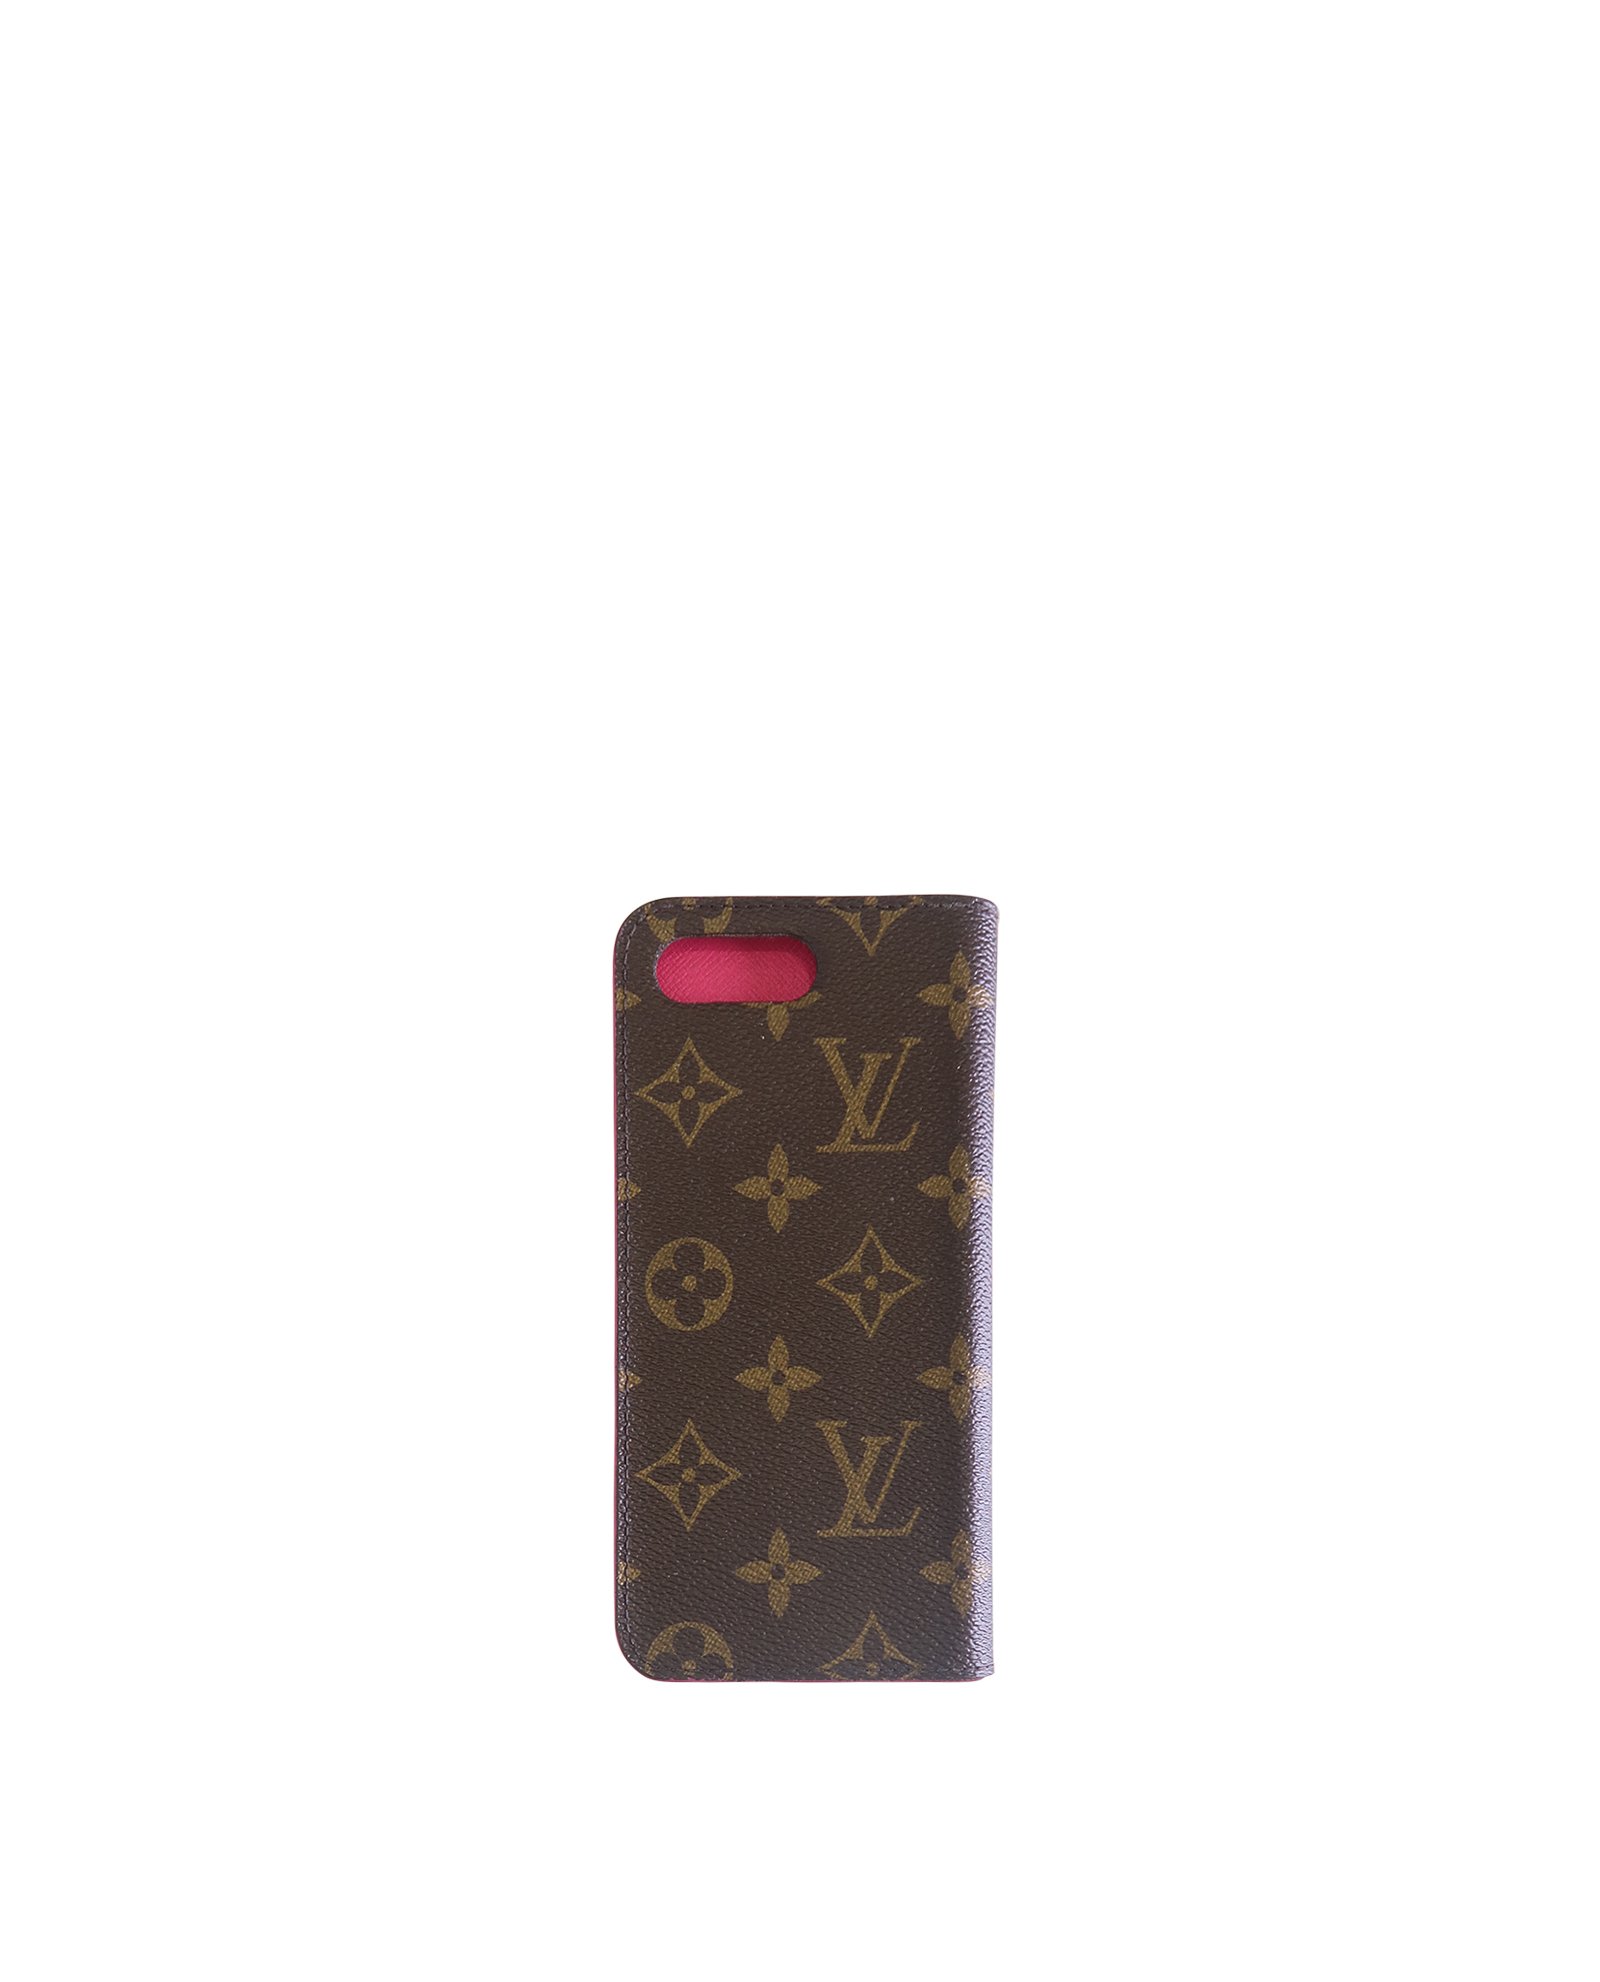 new Gucci and Louis vuitton iphone 8 cases